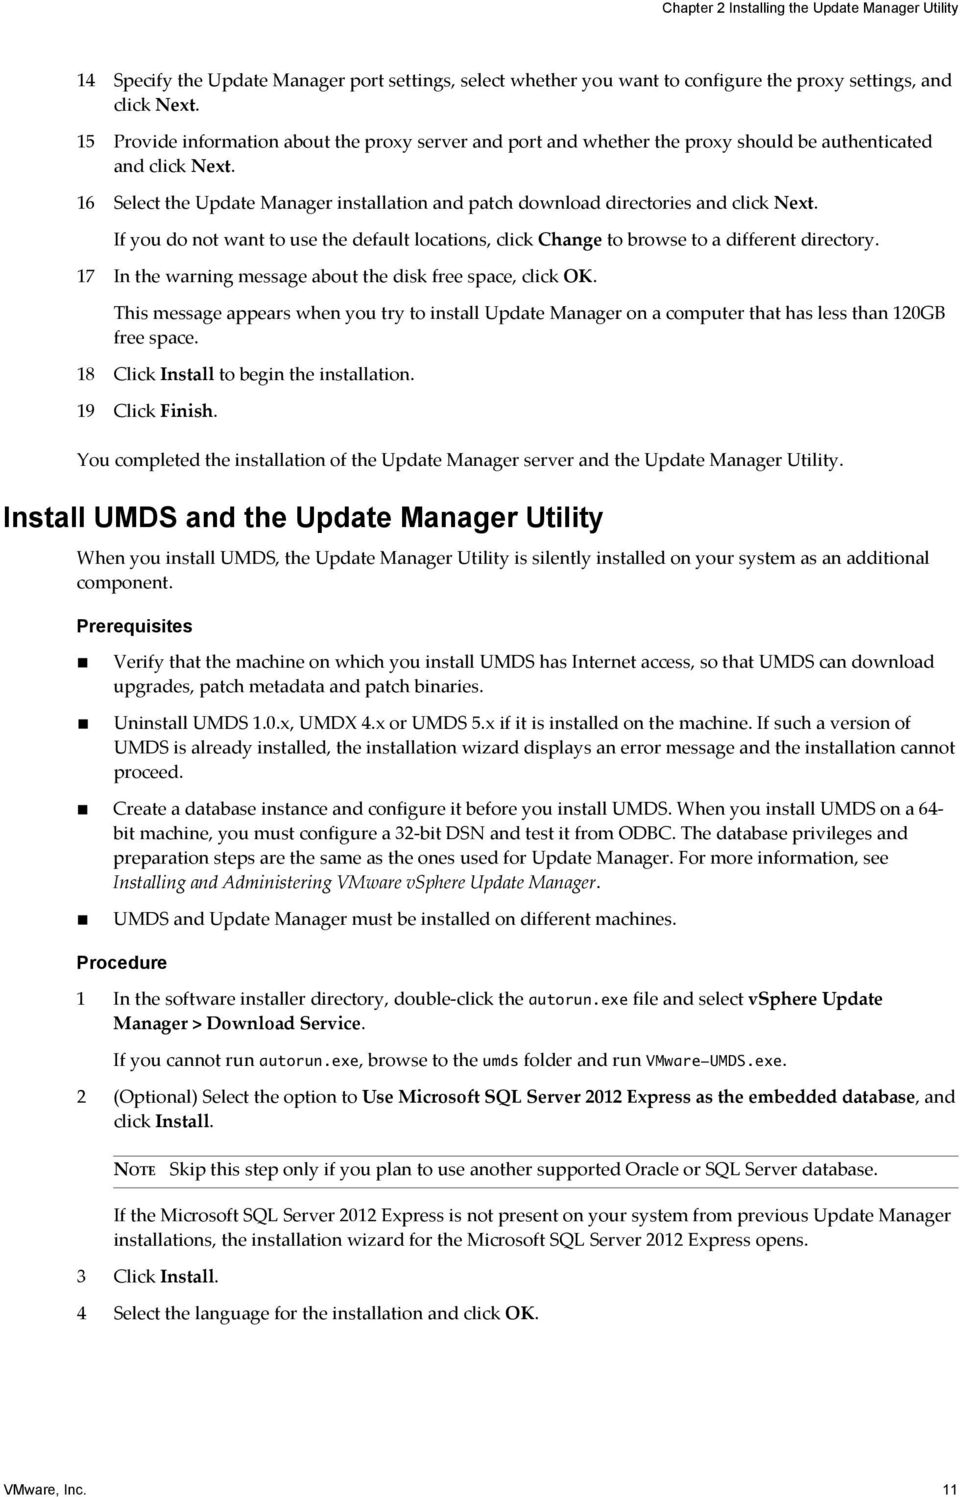 16 Select the Update Manager installation and patch download directories and click Next. If you do not want to use the default locations, click Change to browse to a different directory.